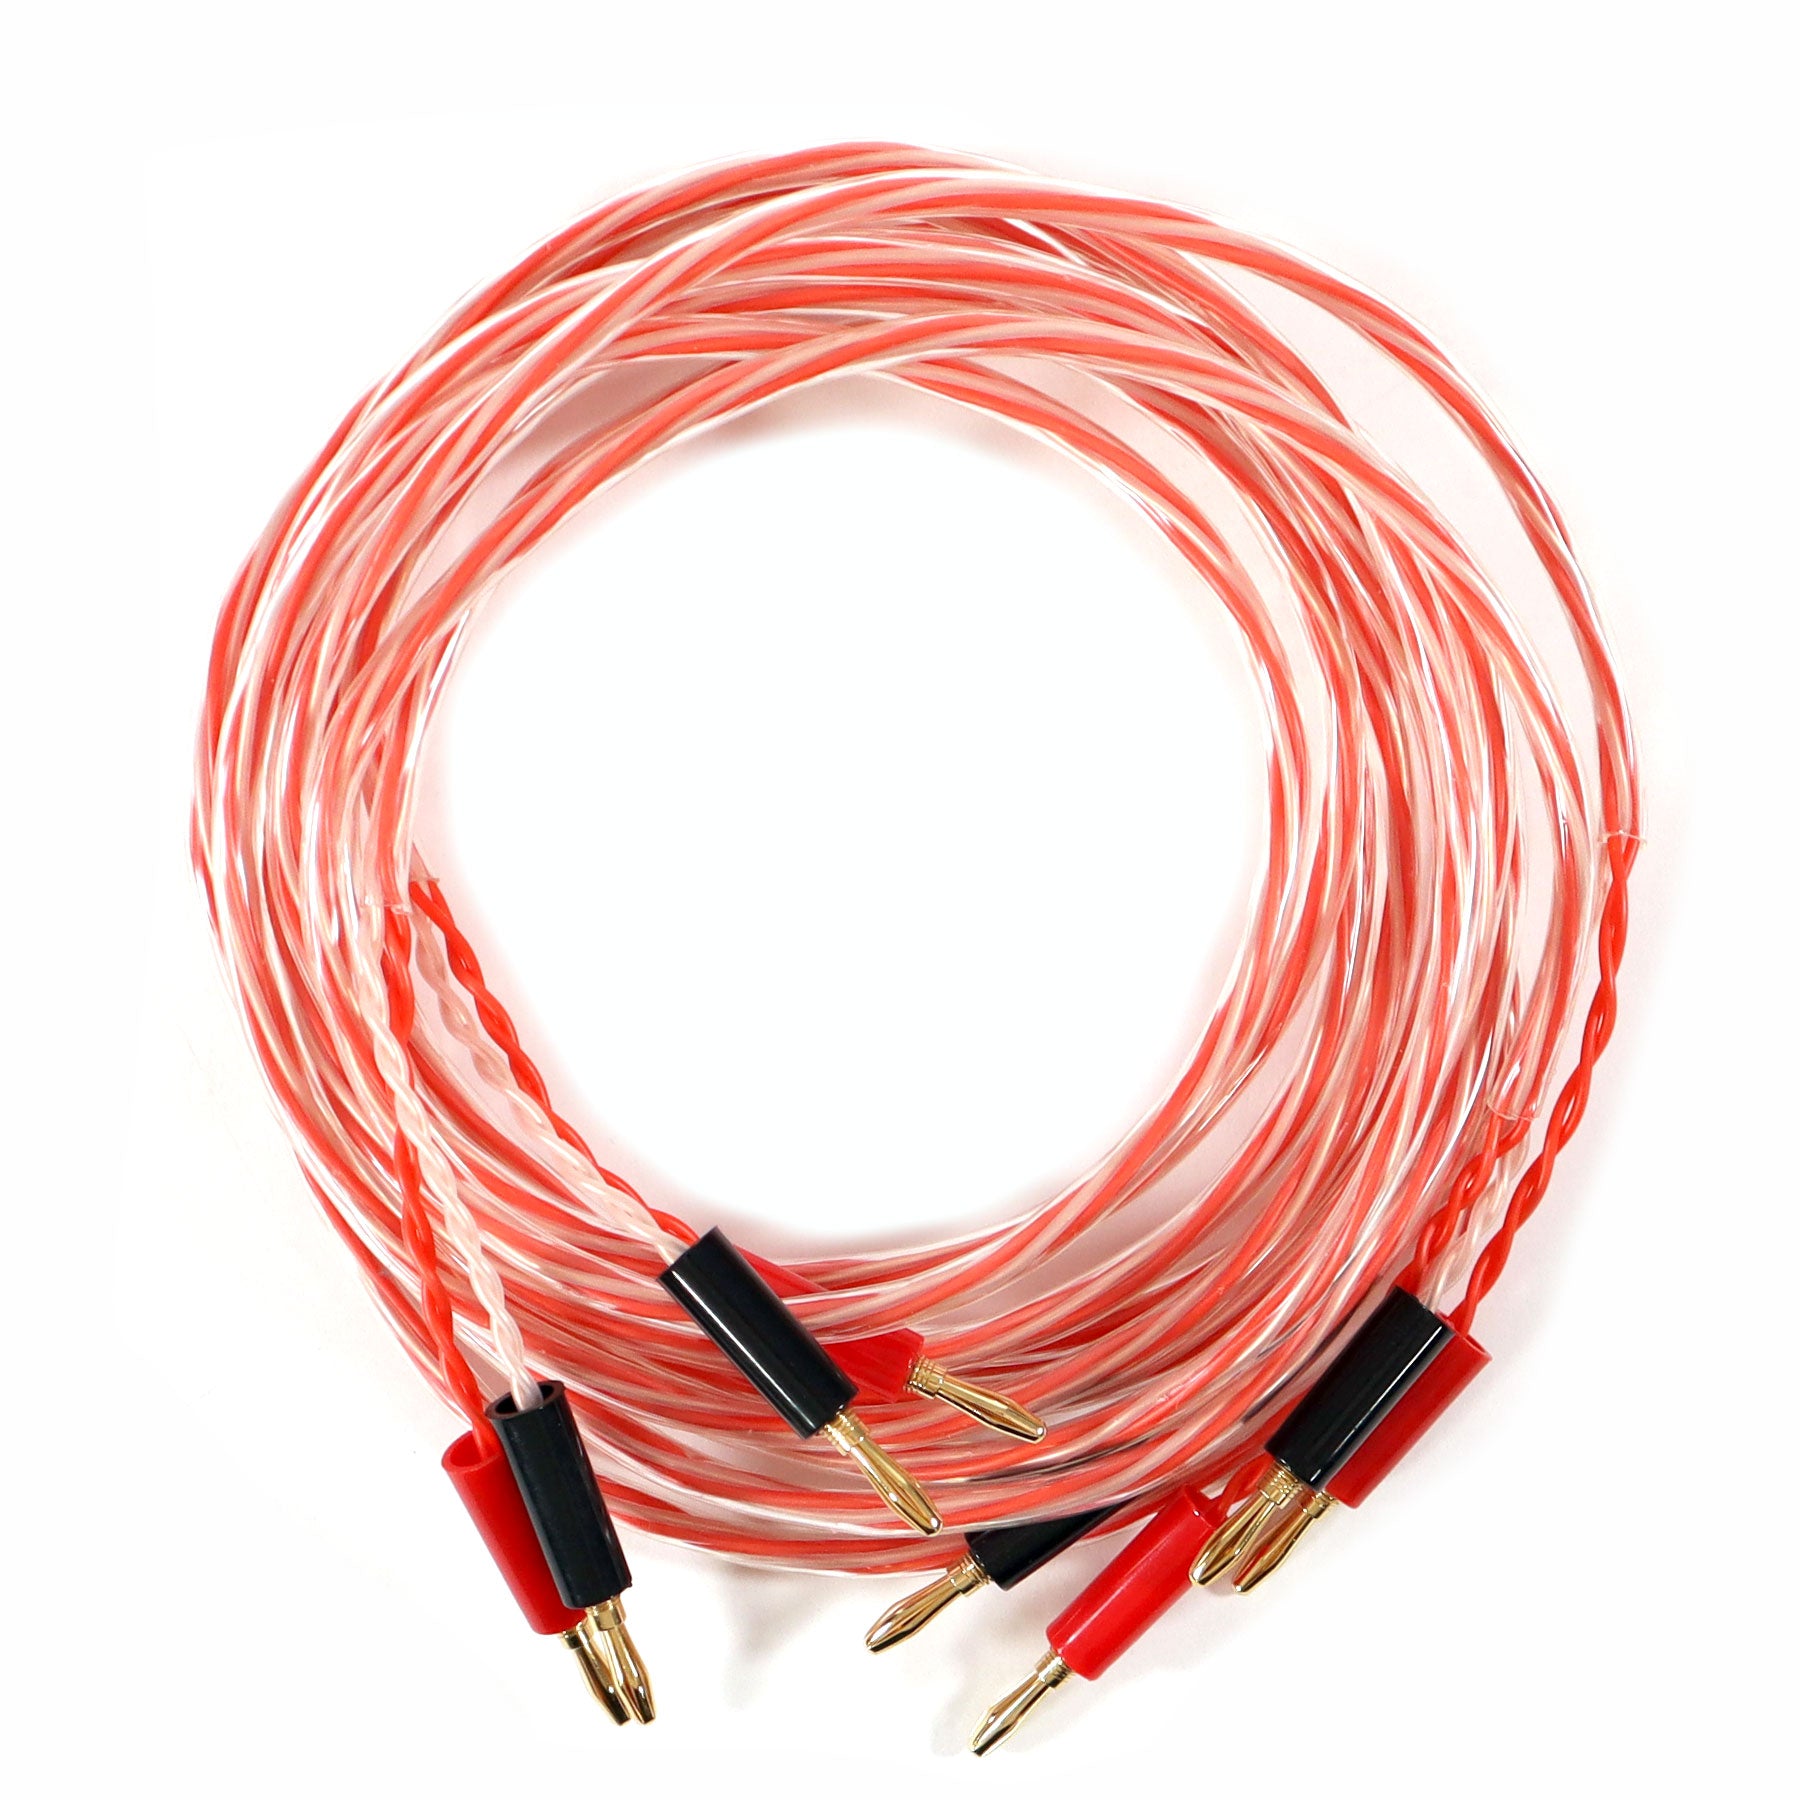 Pro-Ject: Connect It RCA Phono Interconnect Cable (4 ft / 1.2m) —